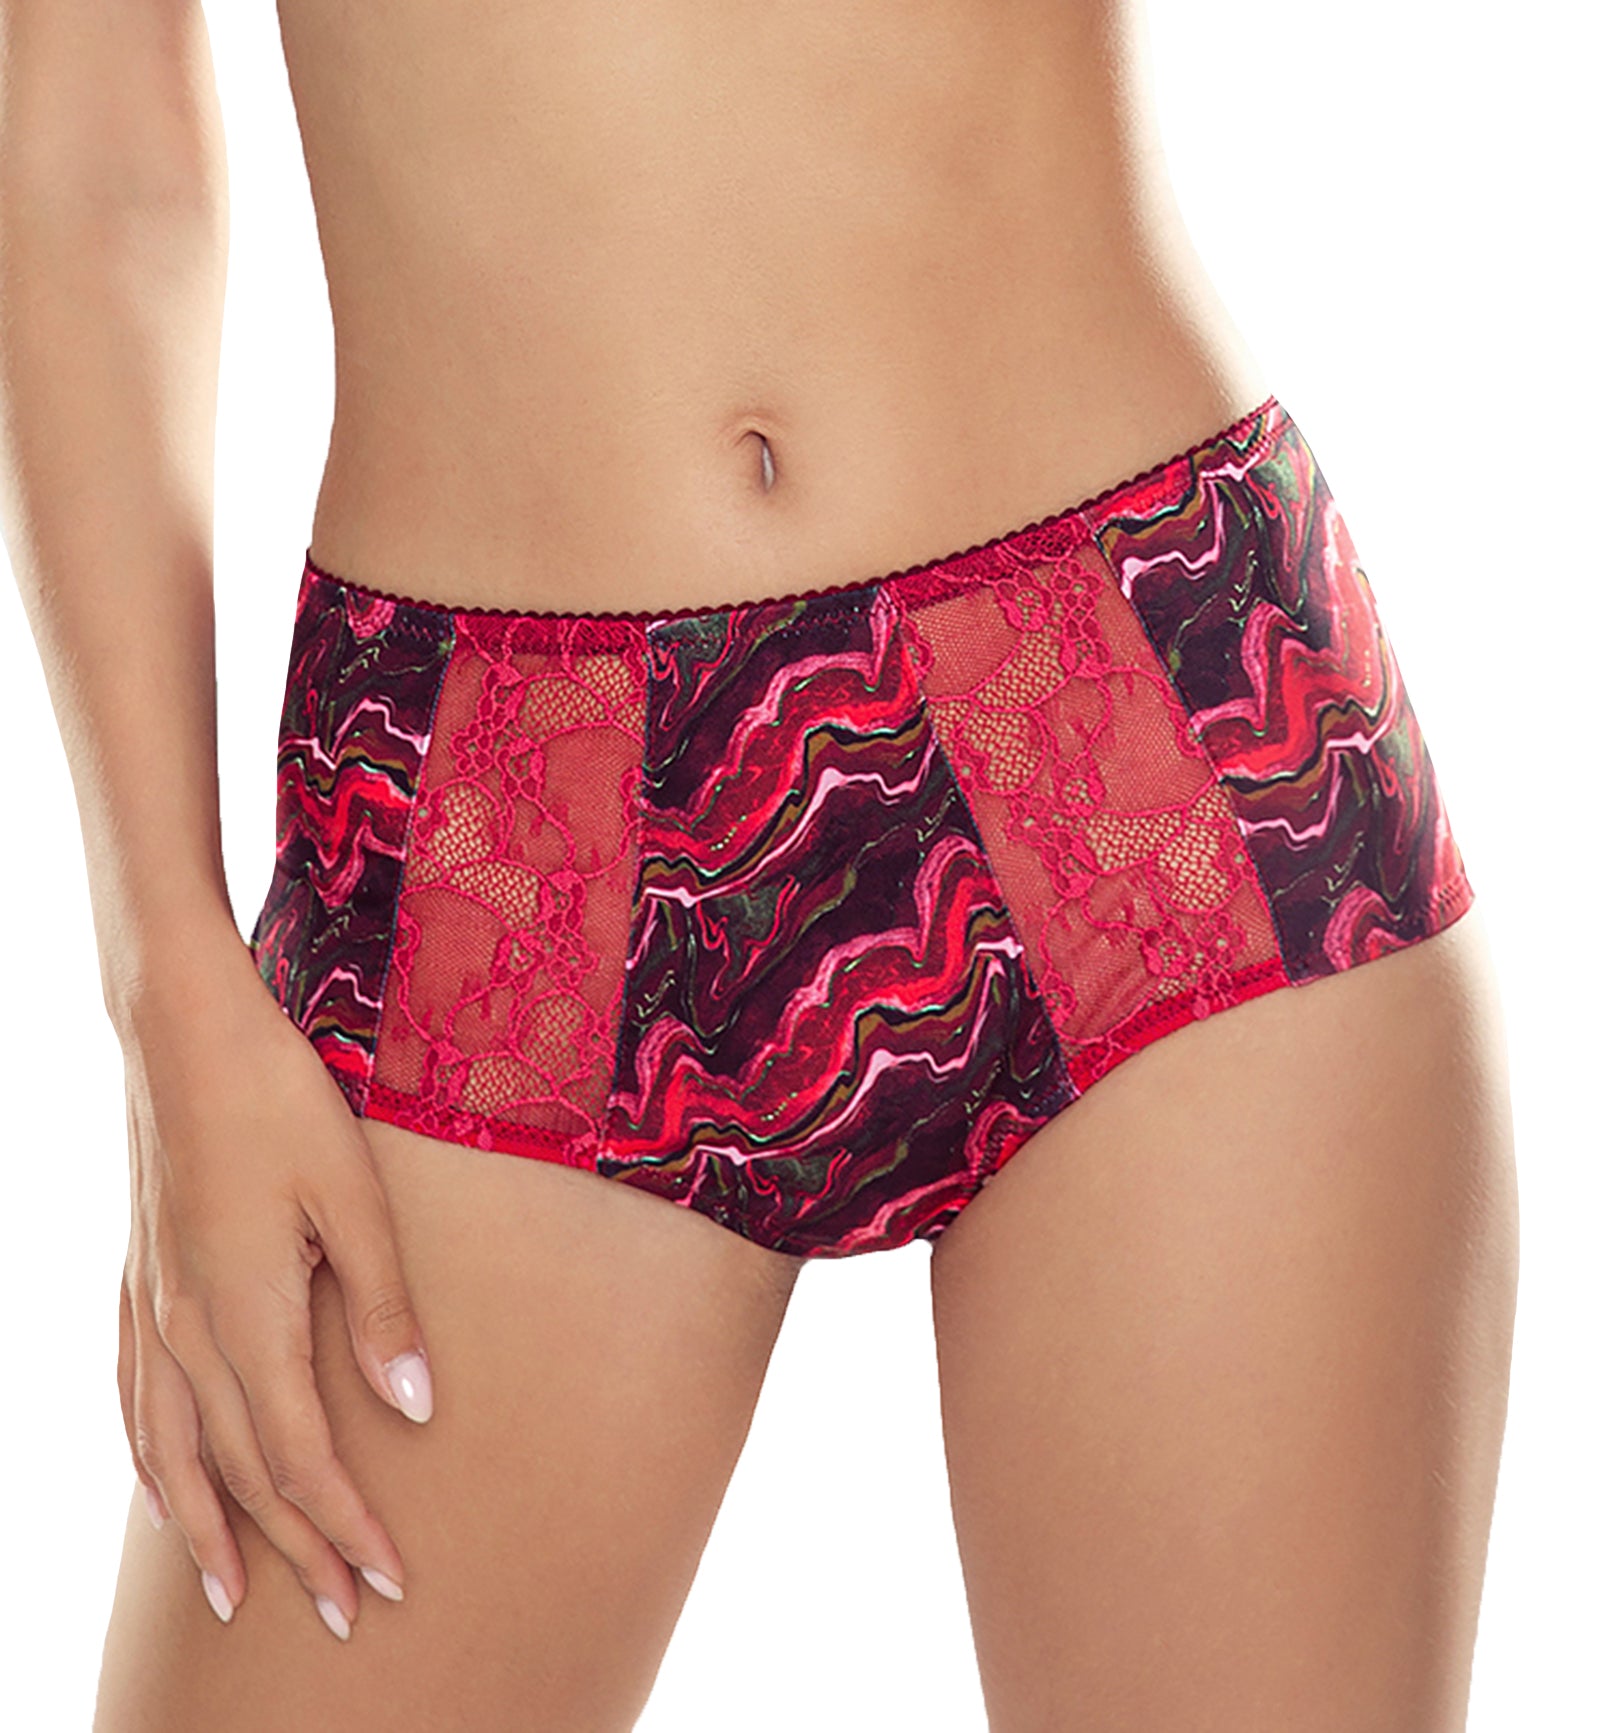 Comexim Olena Matching High Panty (CMOLENAMP),Small,Torched Geode - Torched Geode,Small